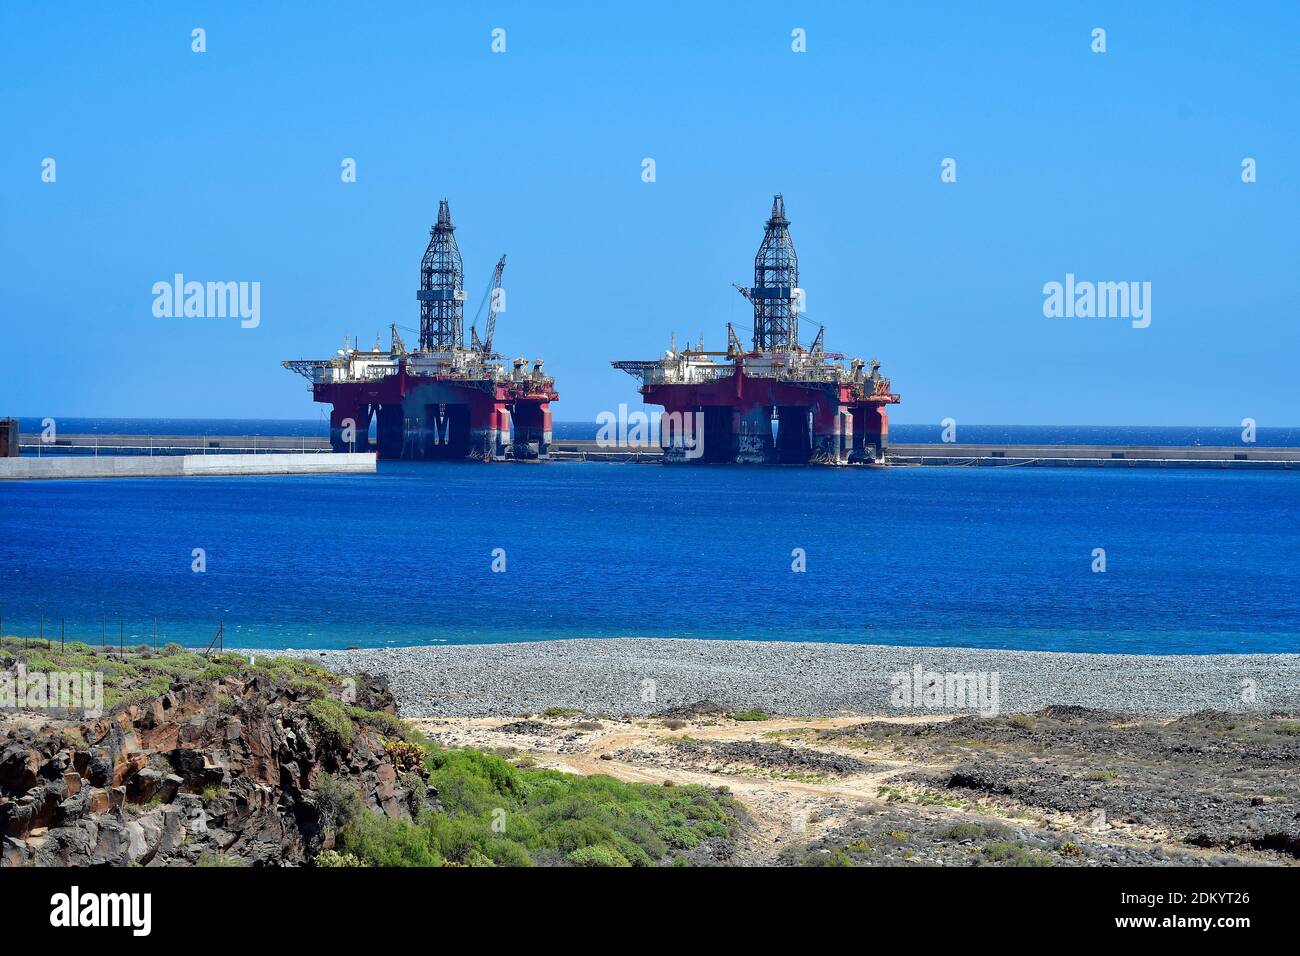 Spain, Canary Islands, offshore platform Stock Photo